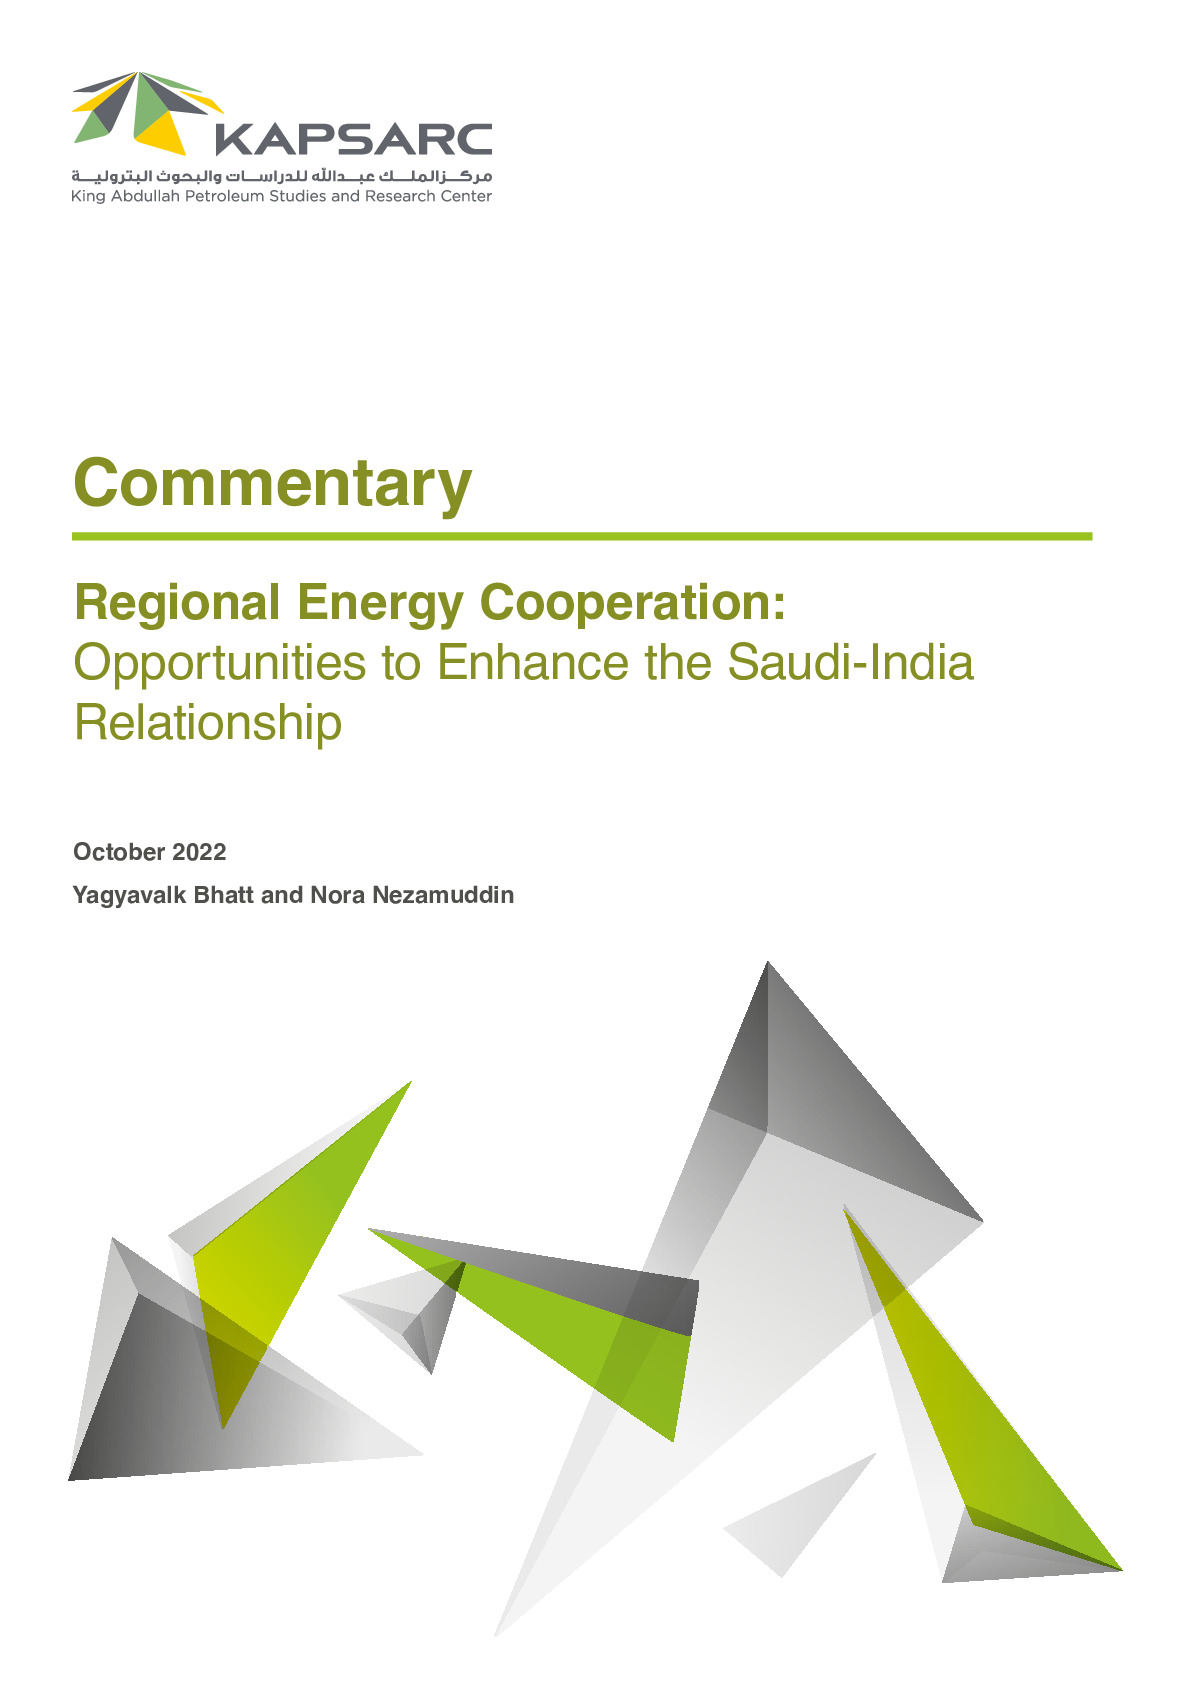 Regional Energy Cooperation: Opportunities to Enhance the Saudi-India Relationship